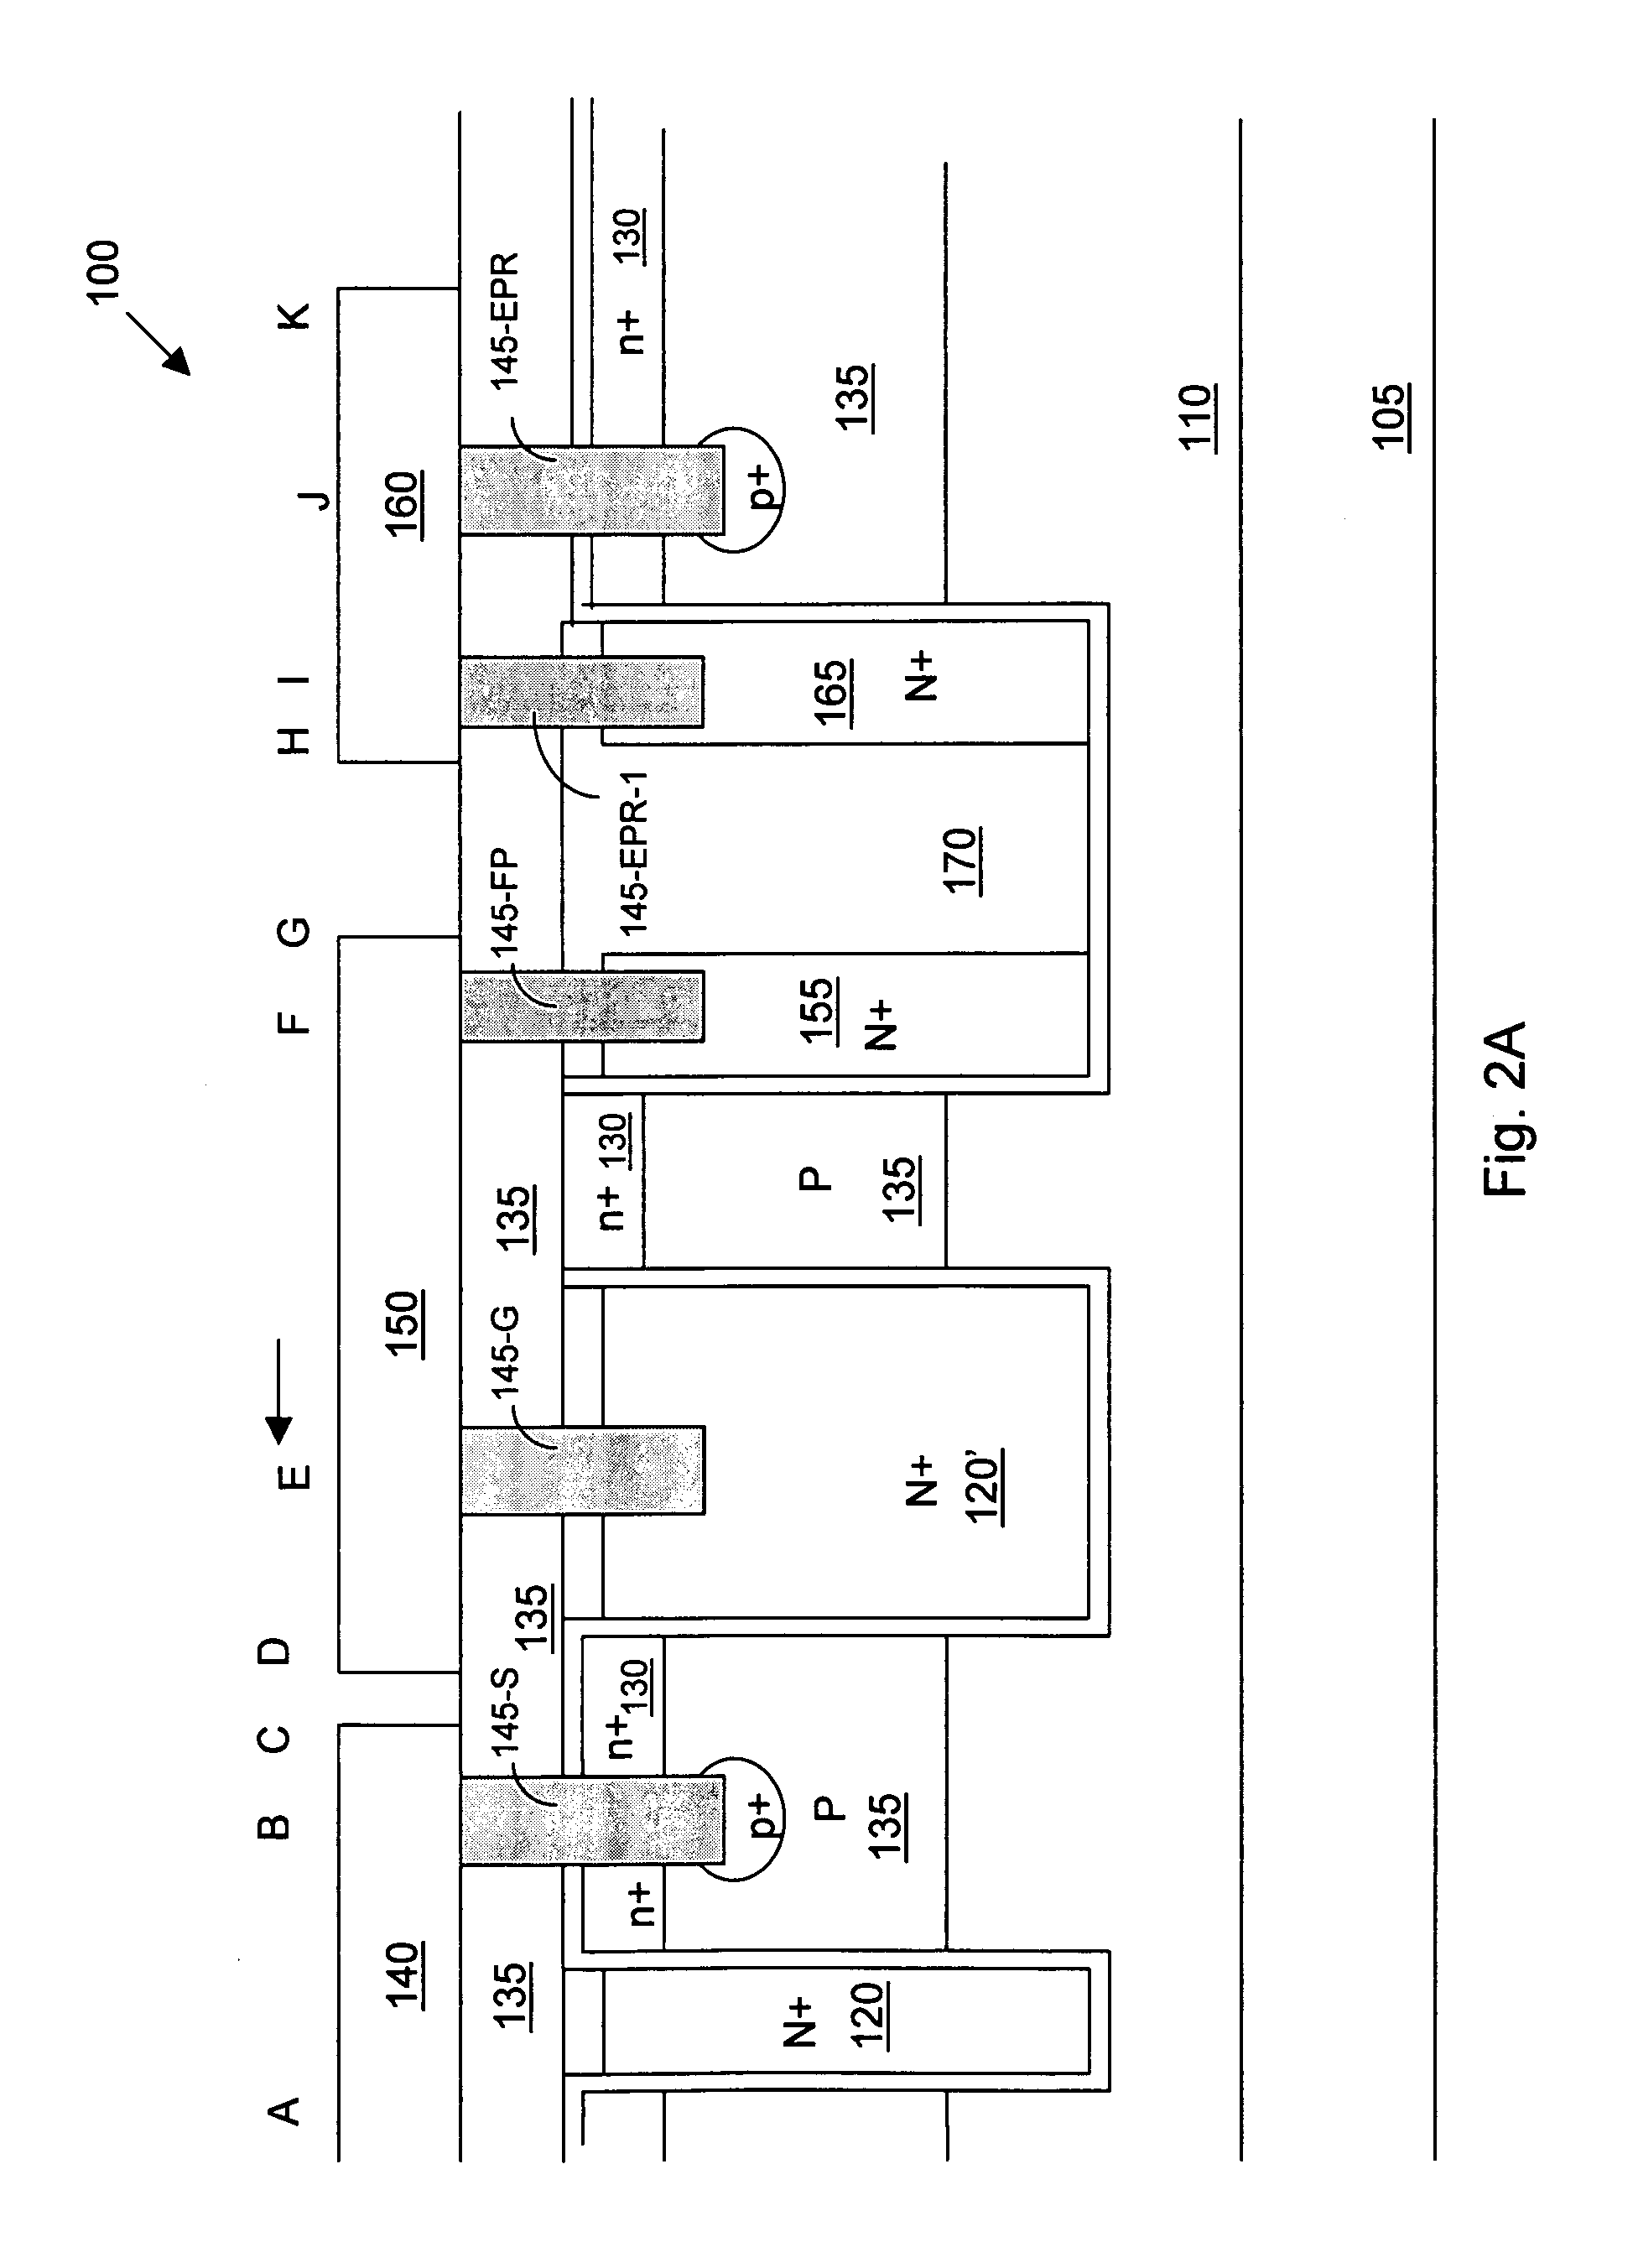 Trenched mosfet device configuration with reduced mask processes